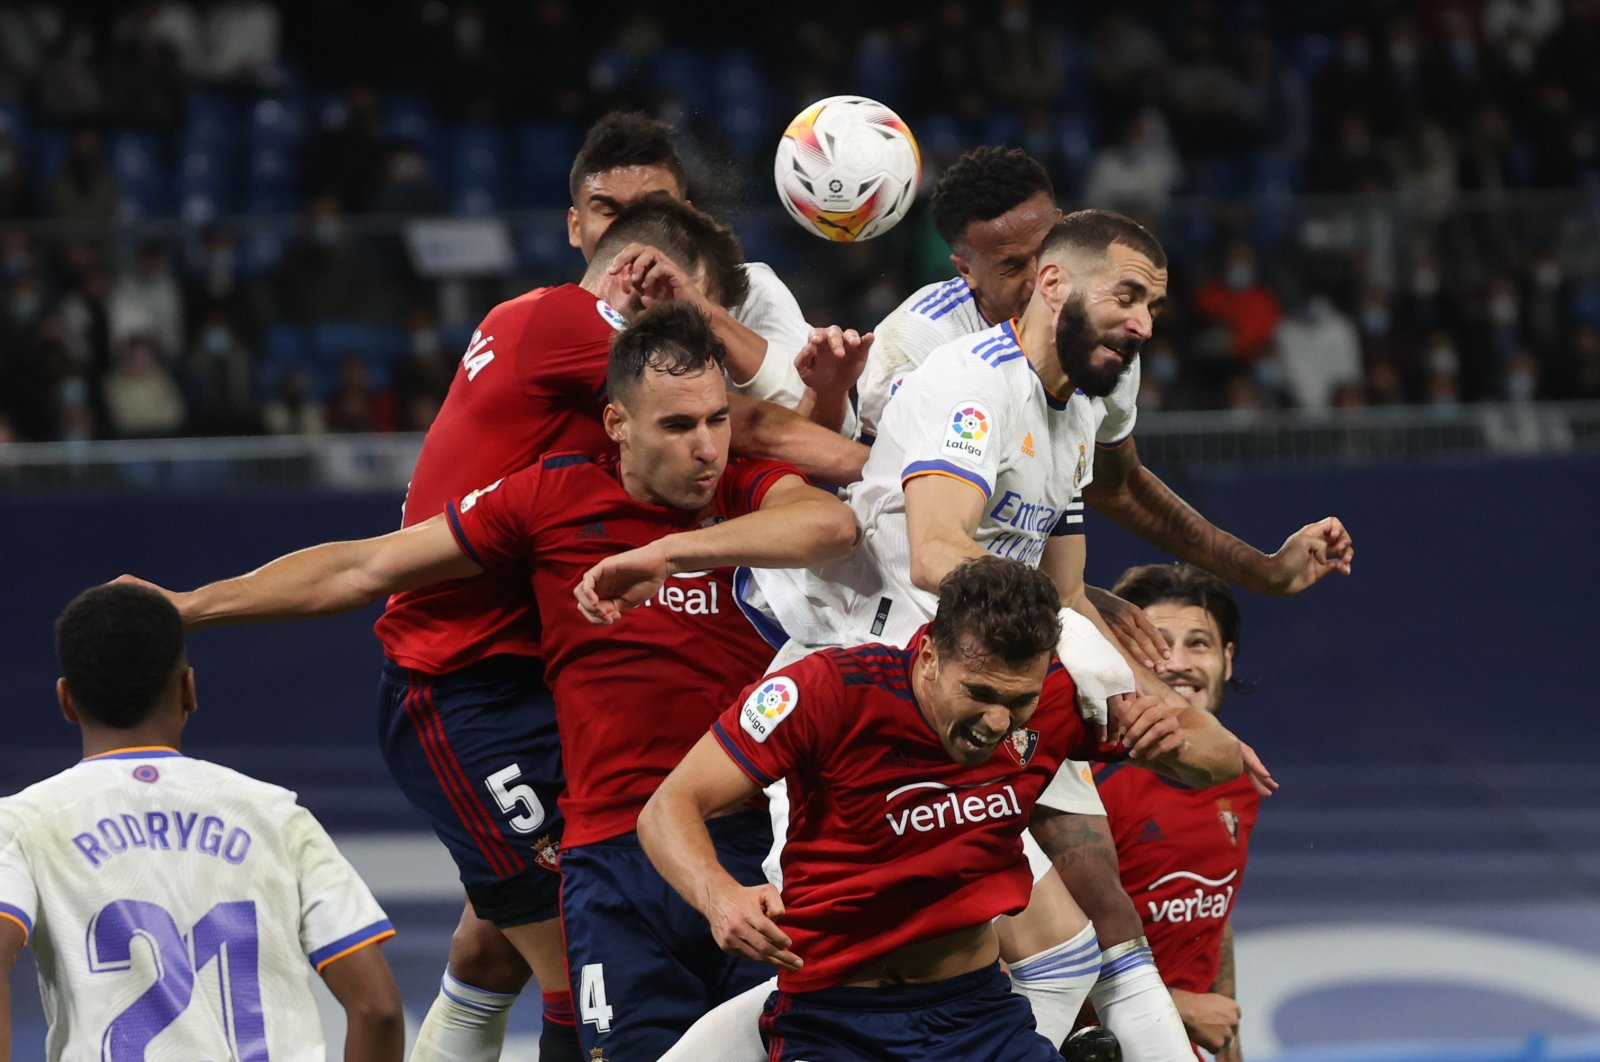 Real Madrid striker Karim Benzema (R) jumps for the ball with some Osasuna players during a La Liga match at Santiago Bernabeu, Madrid, Spain, Oct. 27, 2021. (EPA Photo)